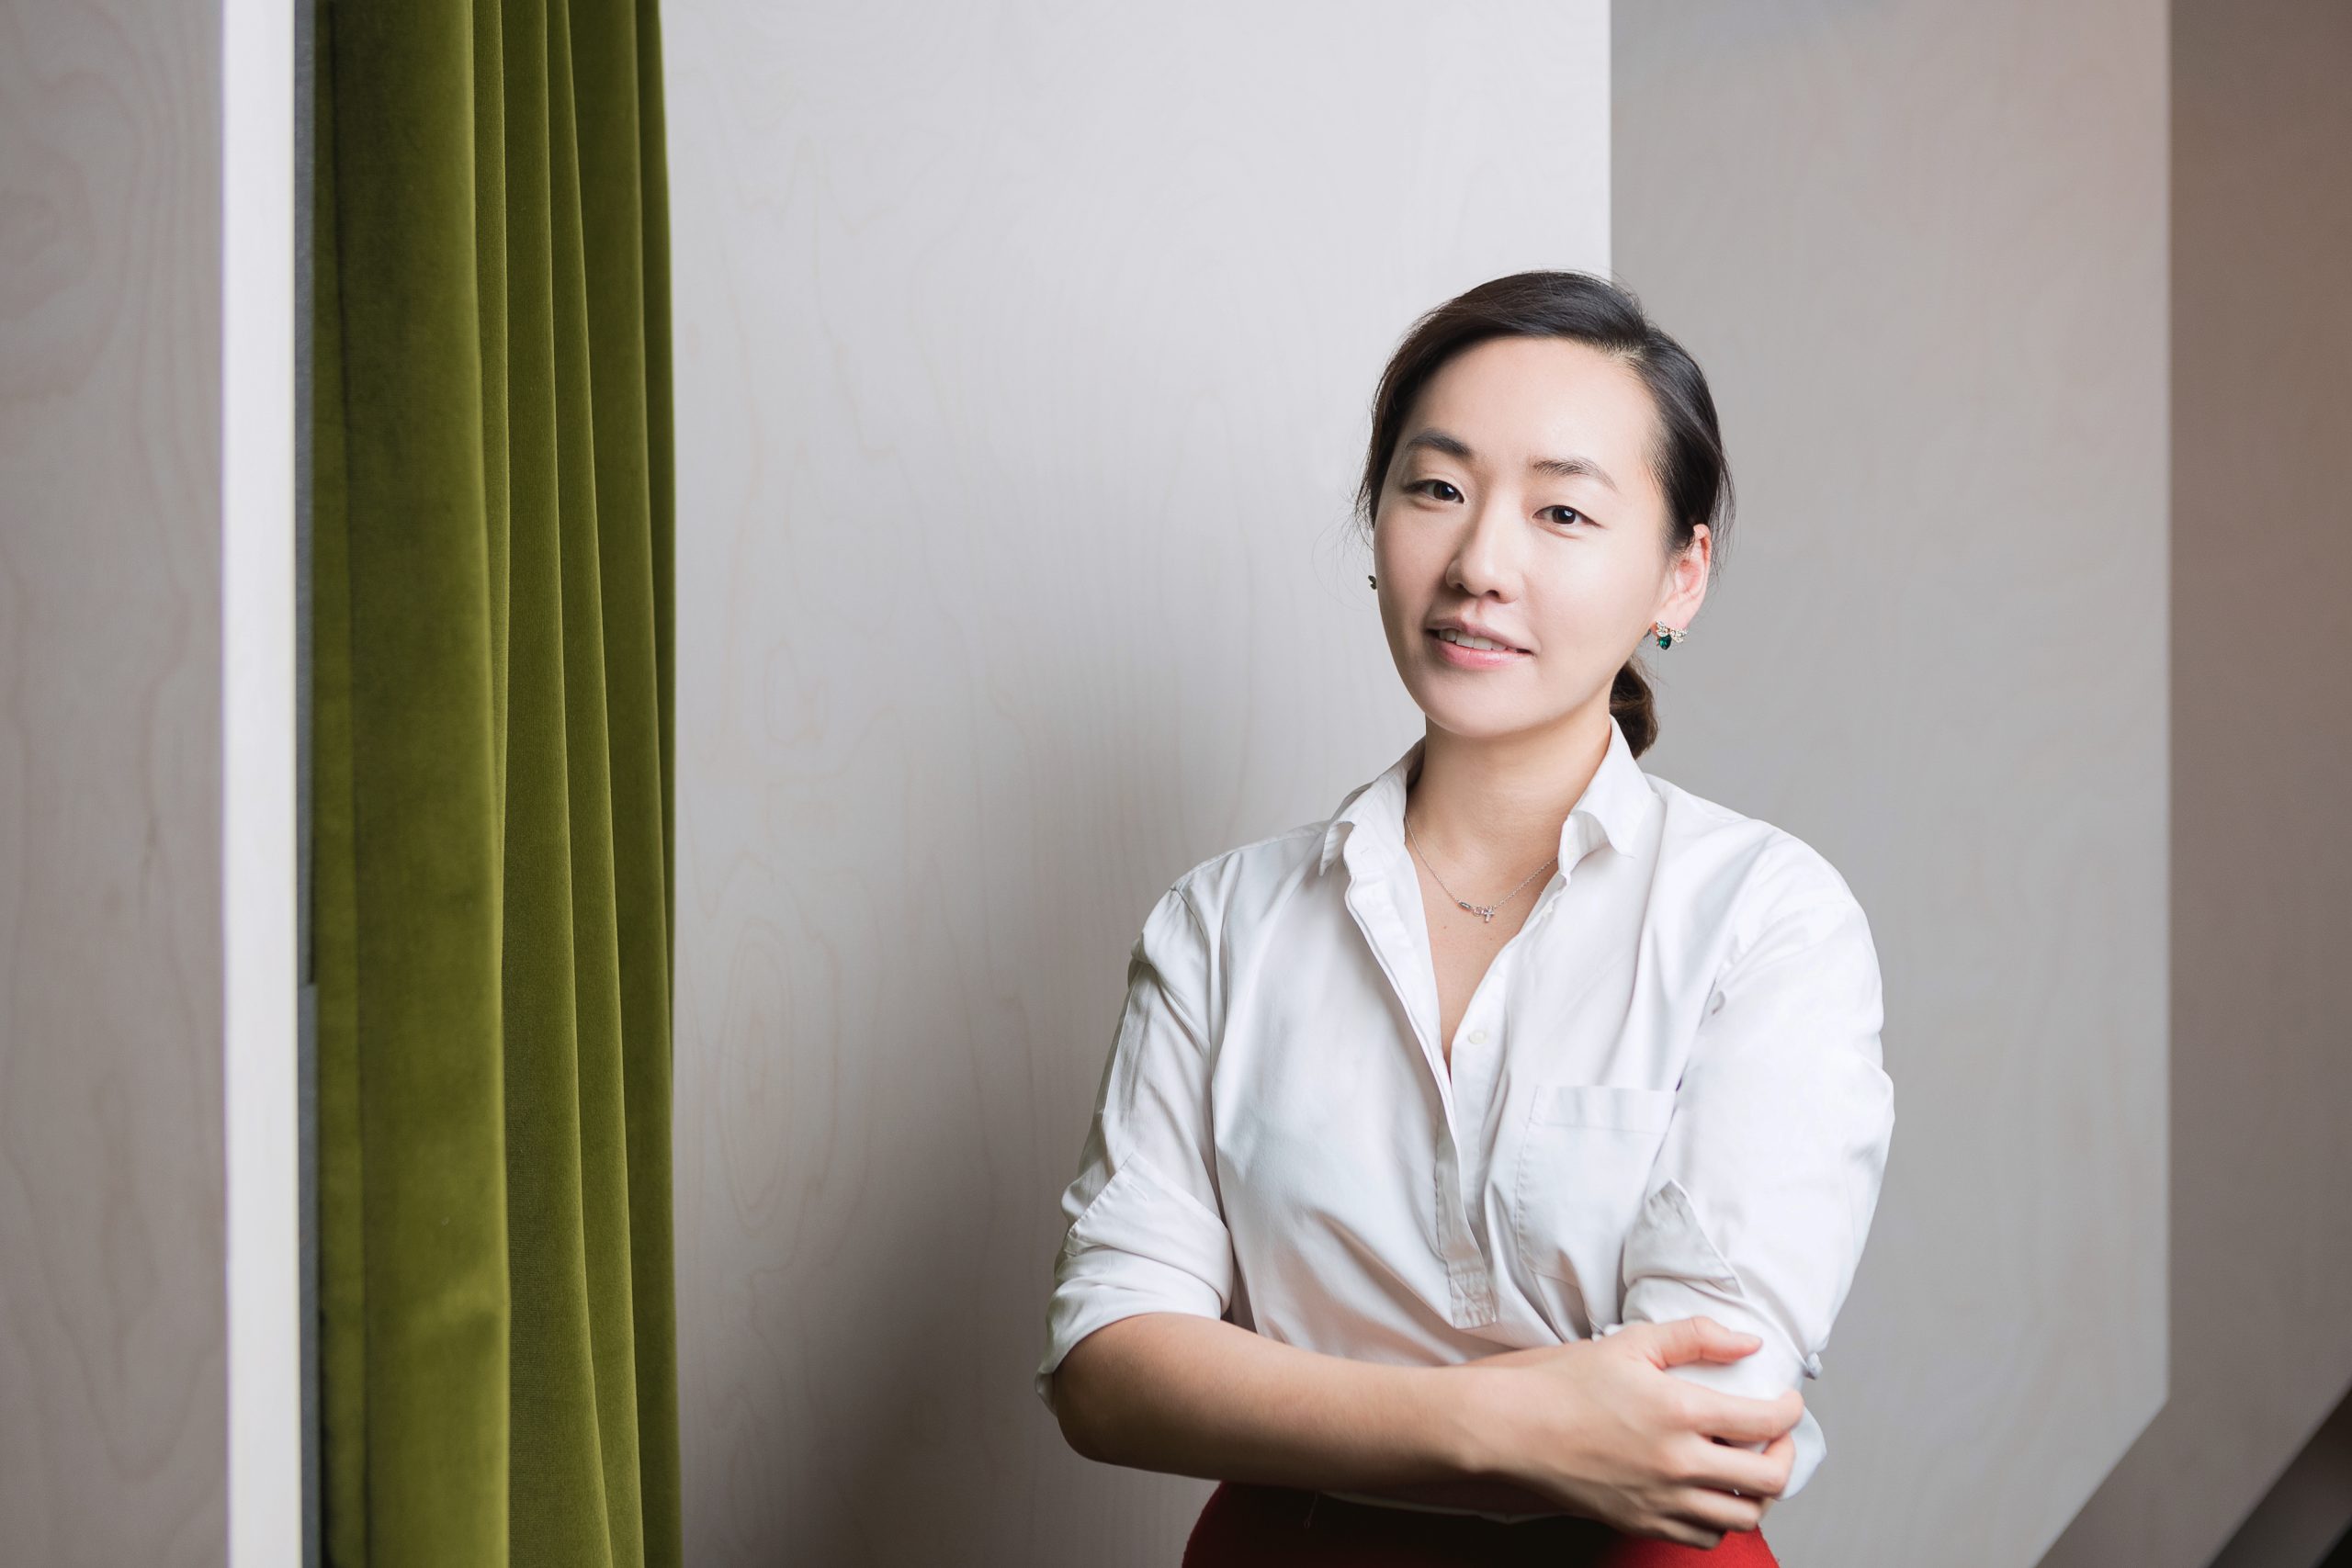 The Beauty Haul Diaries: Jin Kwon, Founder Of TONIC15